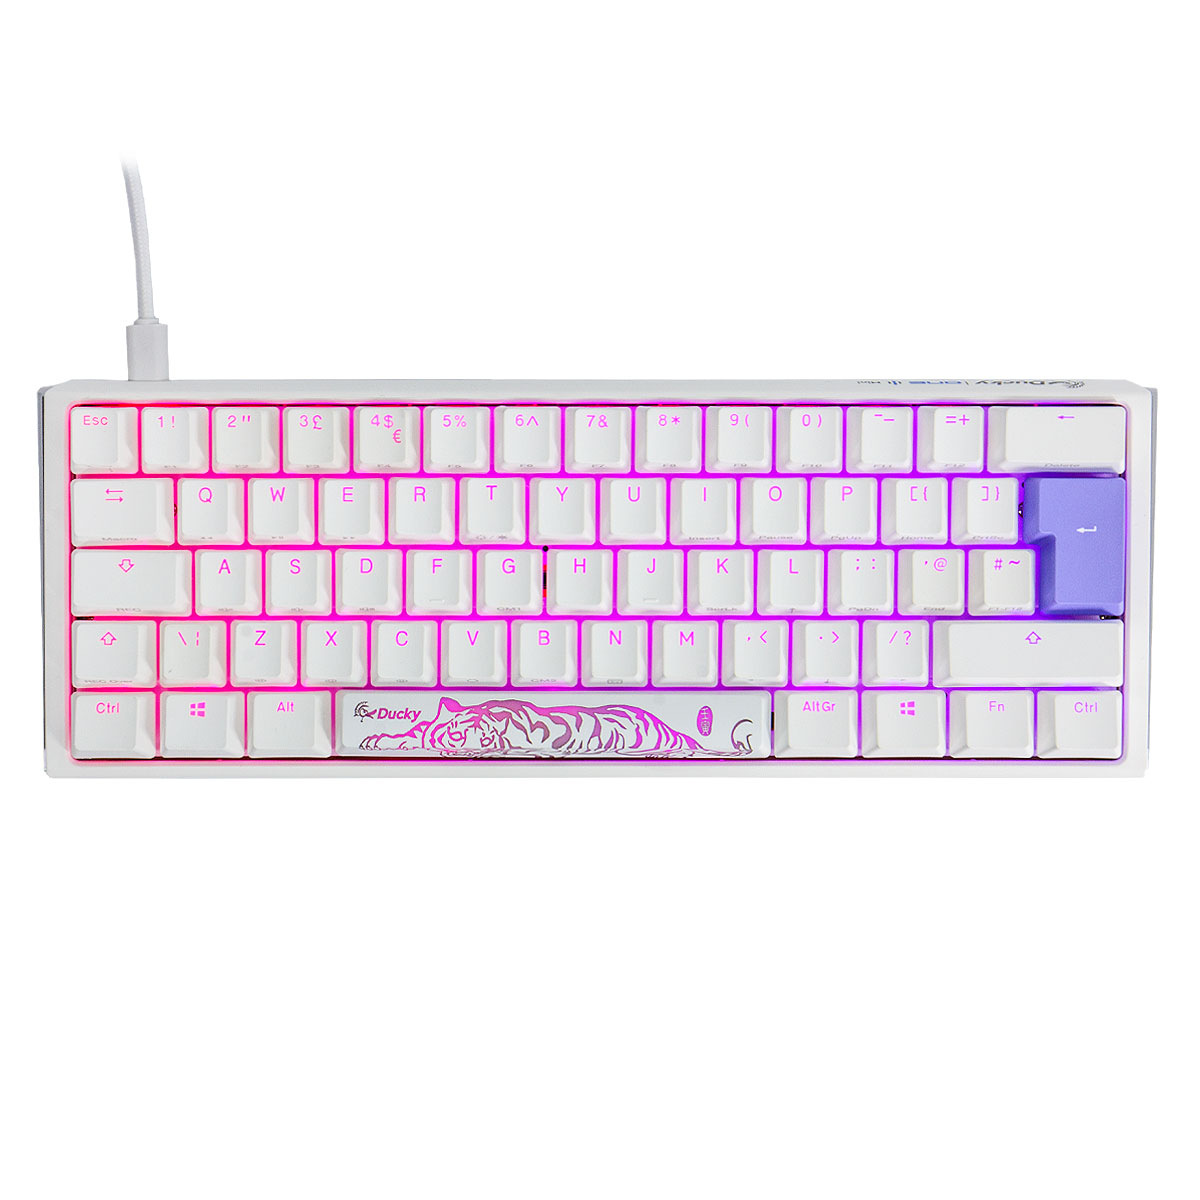 Ducky One 3 Classic 60 USB RGB Mechanical Gaming Keyboard Cherry Brown - Pure White UK Layout